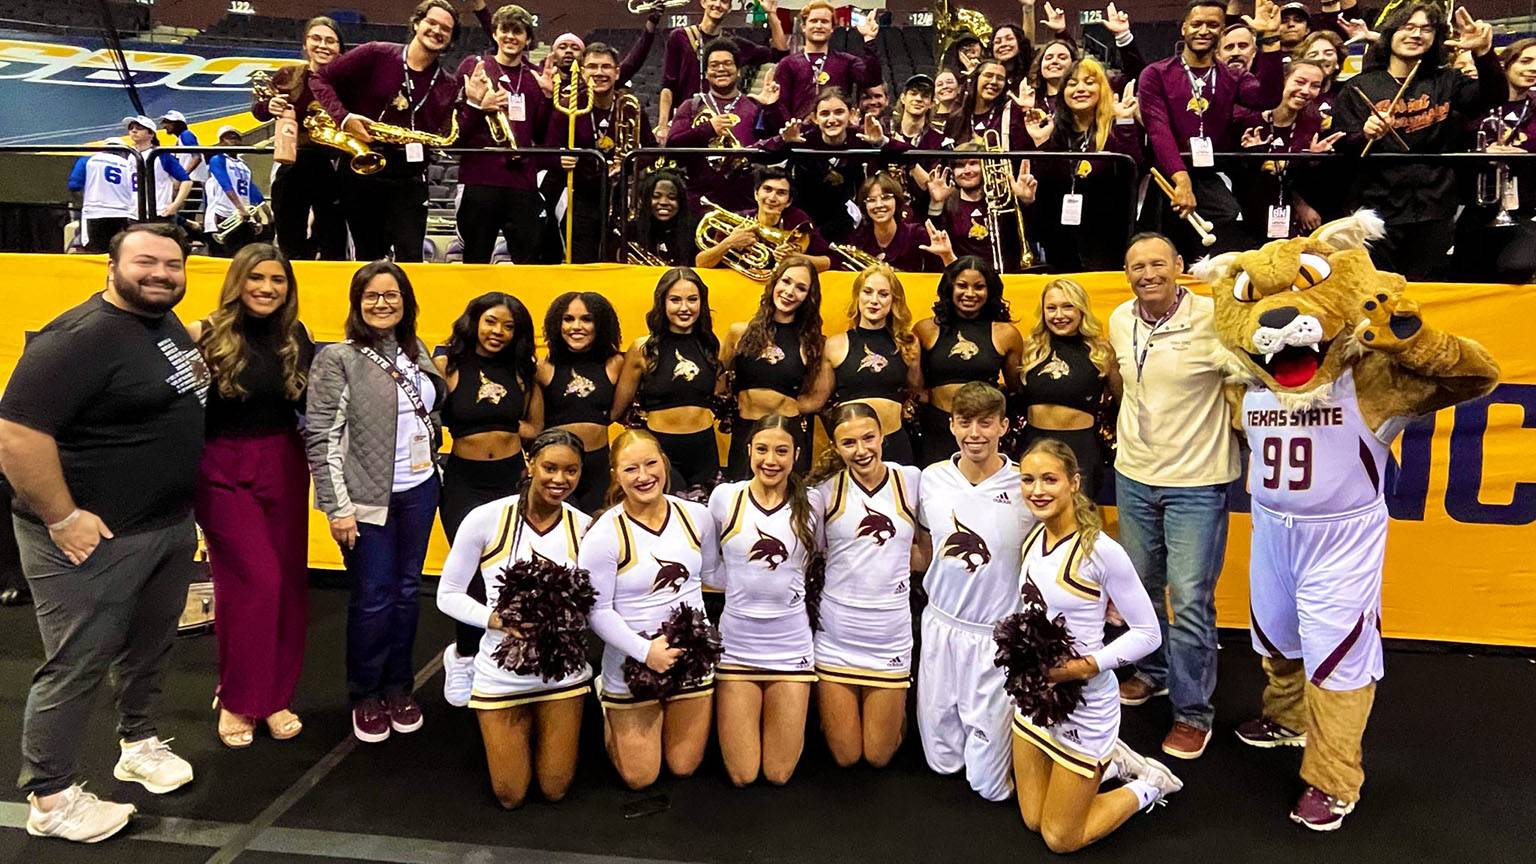 President Damphousse and First Lady Damphousse pose for a photo with TXST cheerleaders.